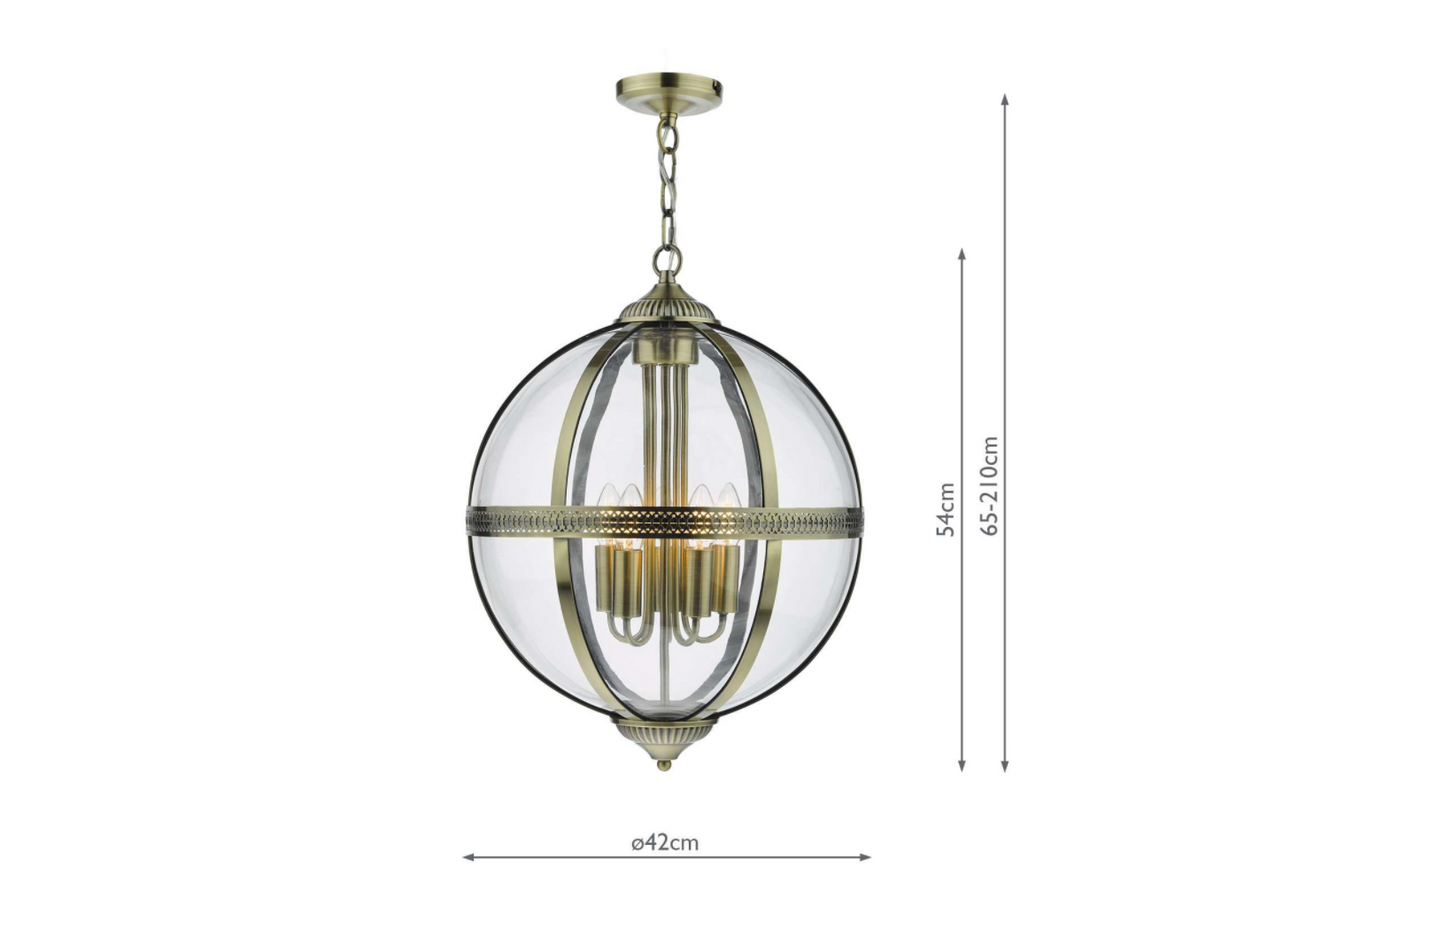 Cannich 5 Light Orb Lantern Pendant In Antique Brass And Clear Glass - ID 11513